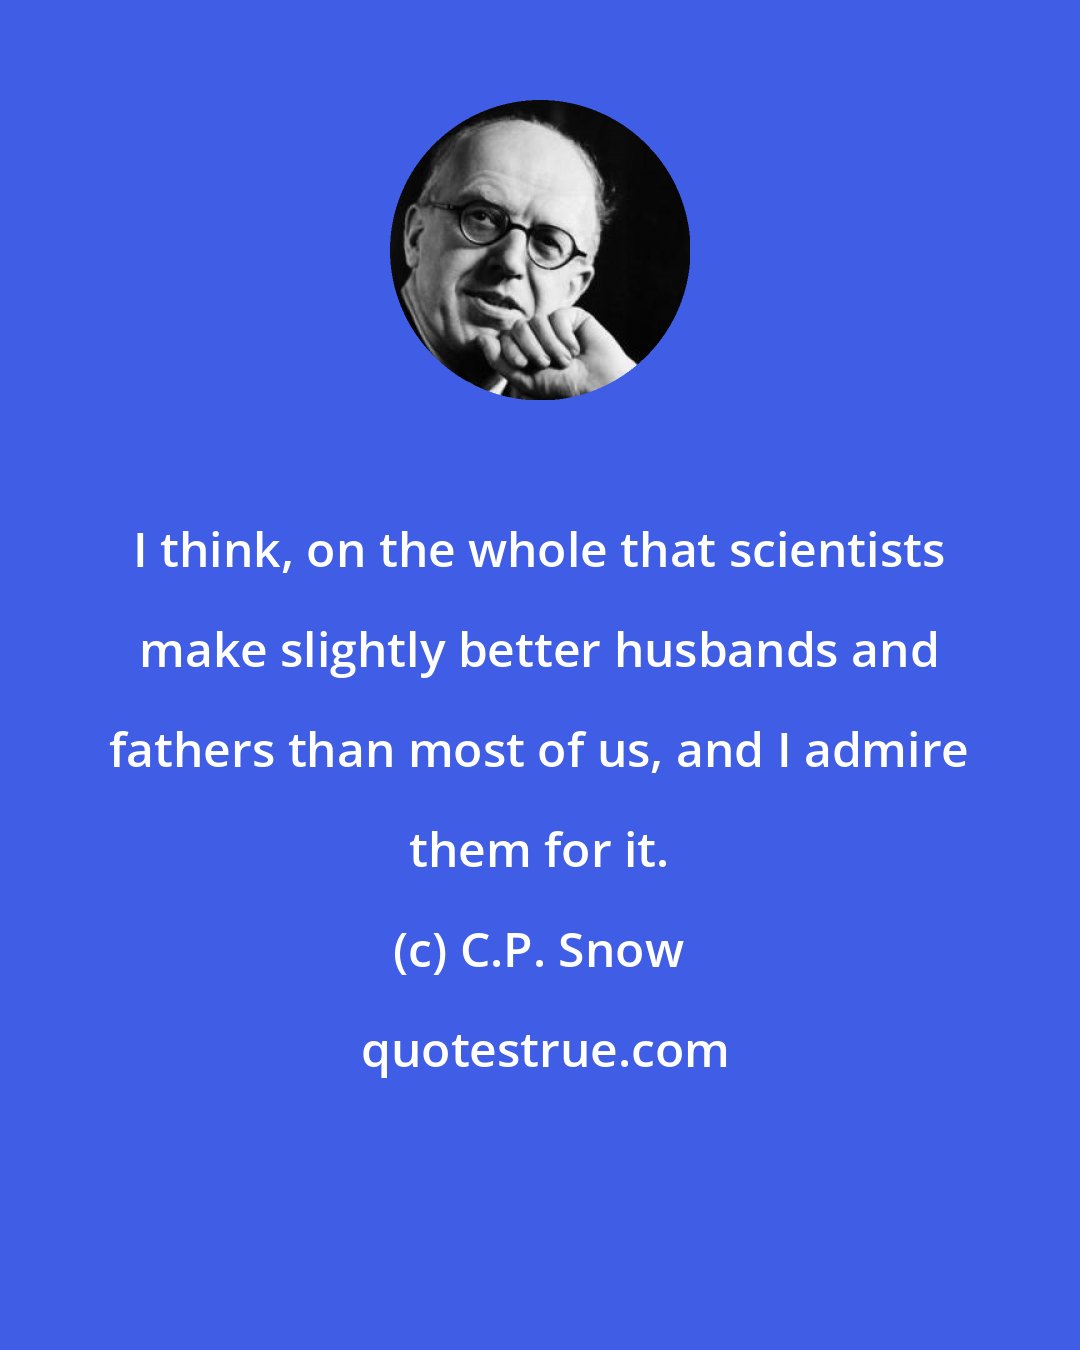 C.P. Snow: I think, on the whole that scientists make slightly better husbands and fathers than most of us, and I admire them for it.